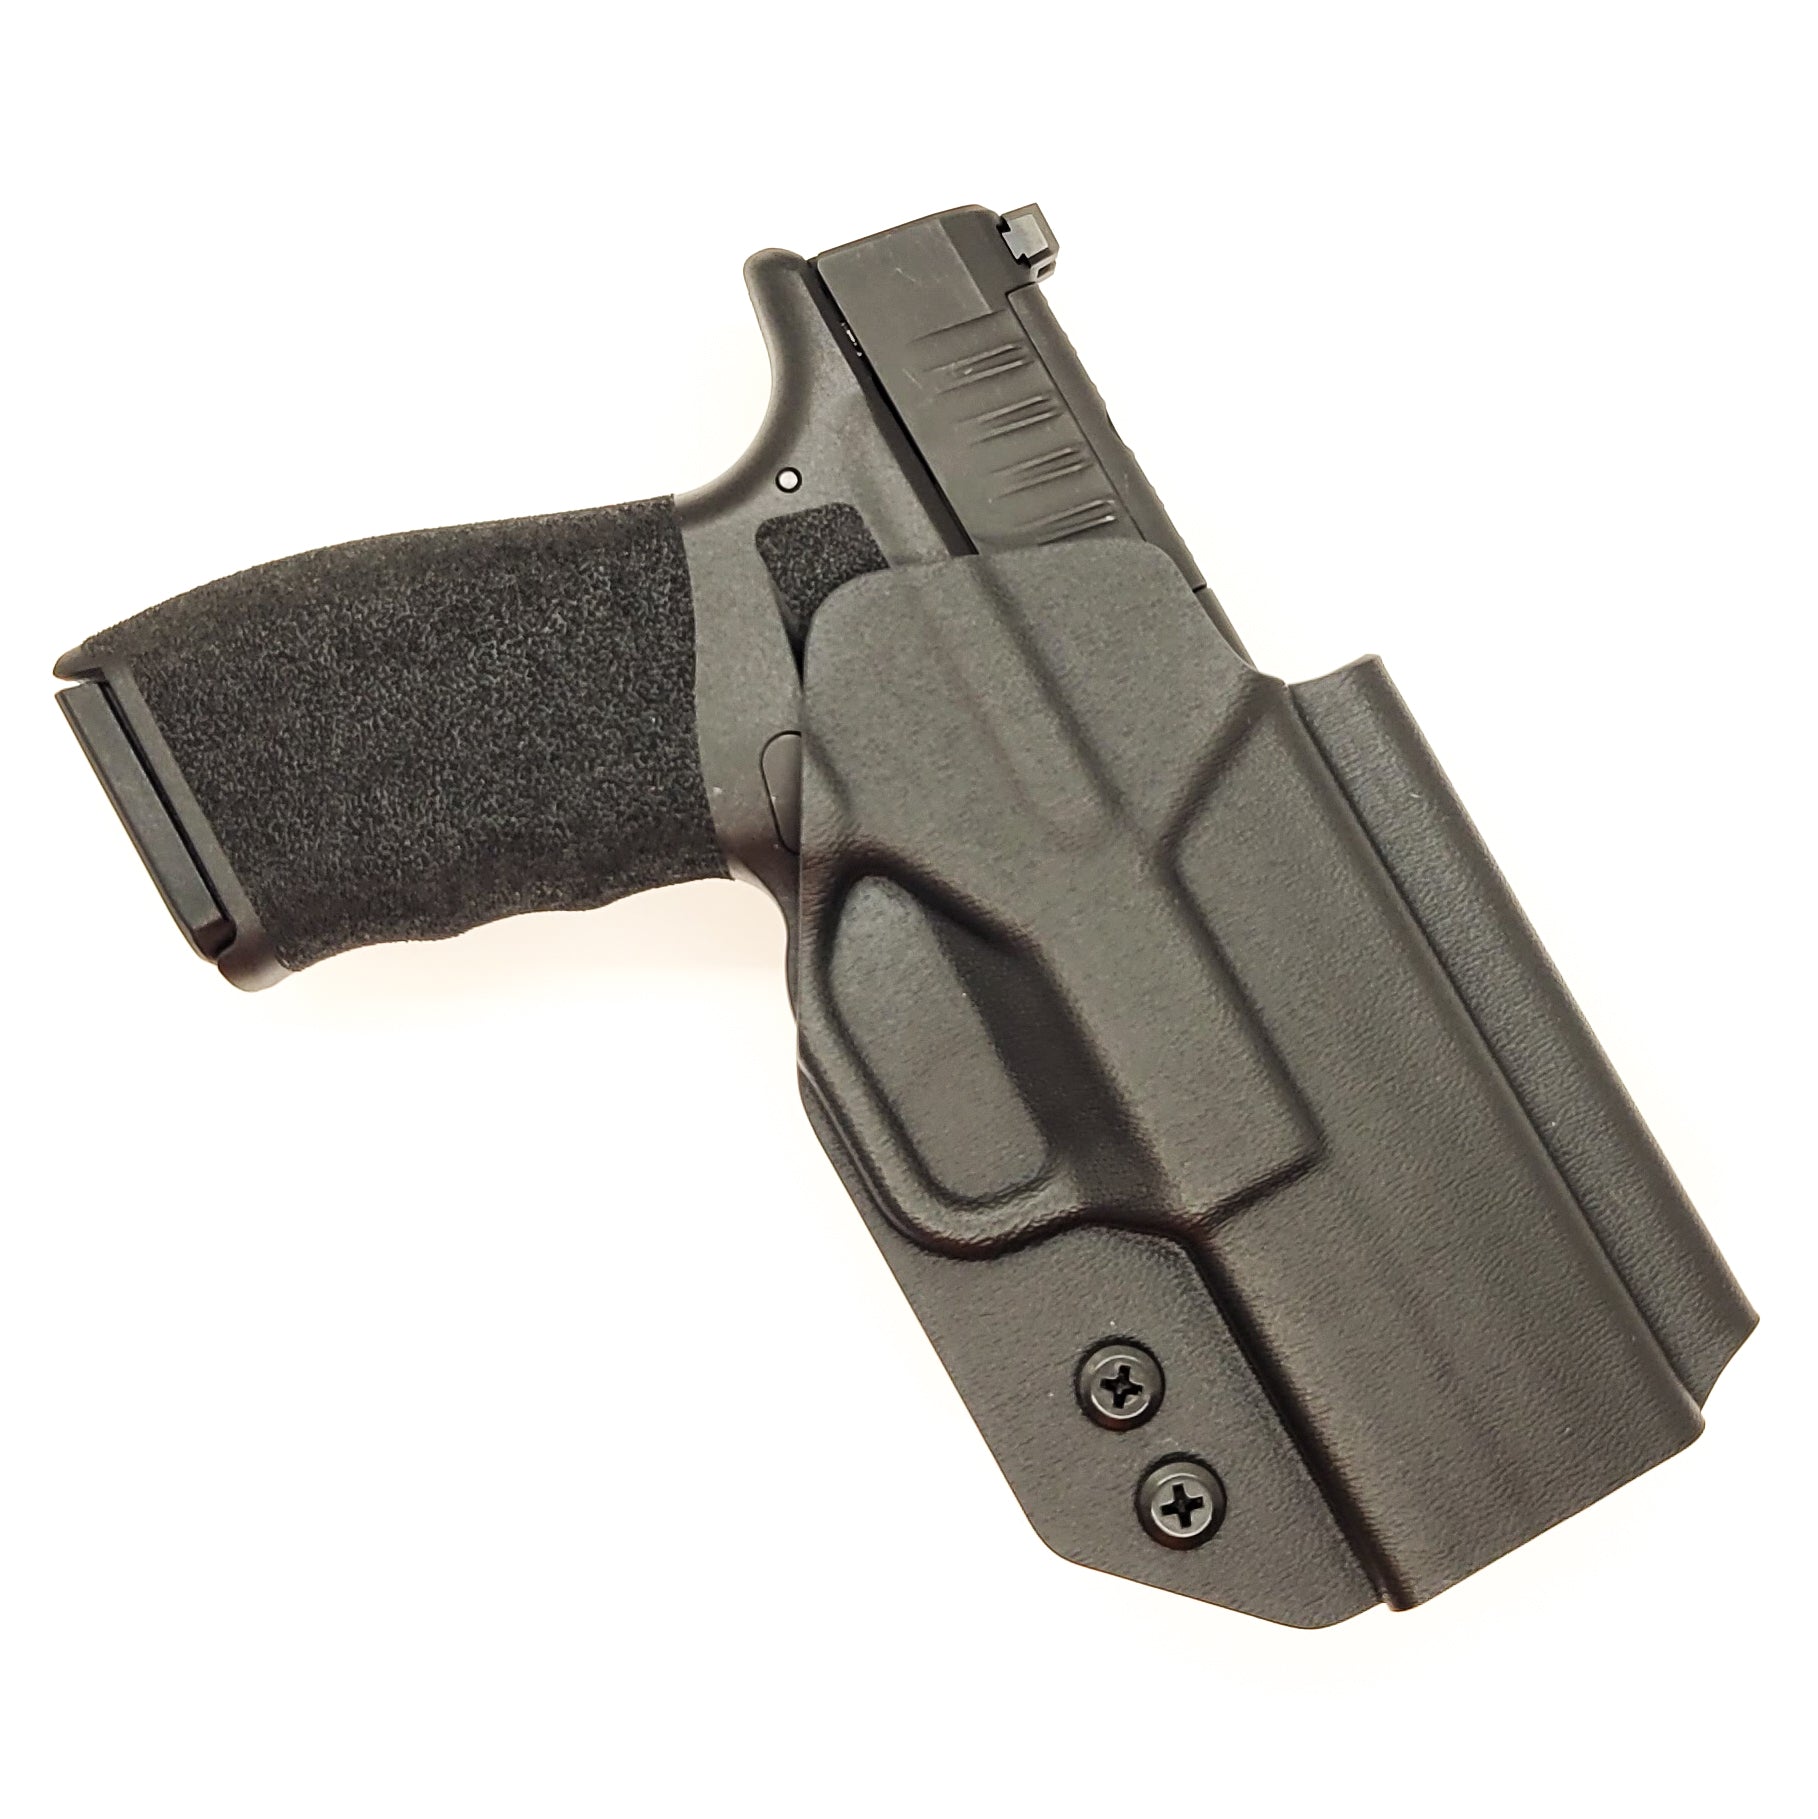 For the best Outside Waistband kydex Holster designed to fit the Springfield Armory Hellcat Pro with or without a red dot sight mounted to the pistol, look to Four Brothers.  Full sweat guard, adjustable retention, minimal material, & smooth for reduced printing. Proudly made in the USA by veterans & law enforcement. 